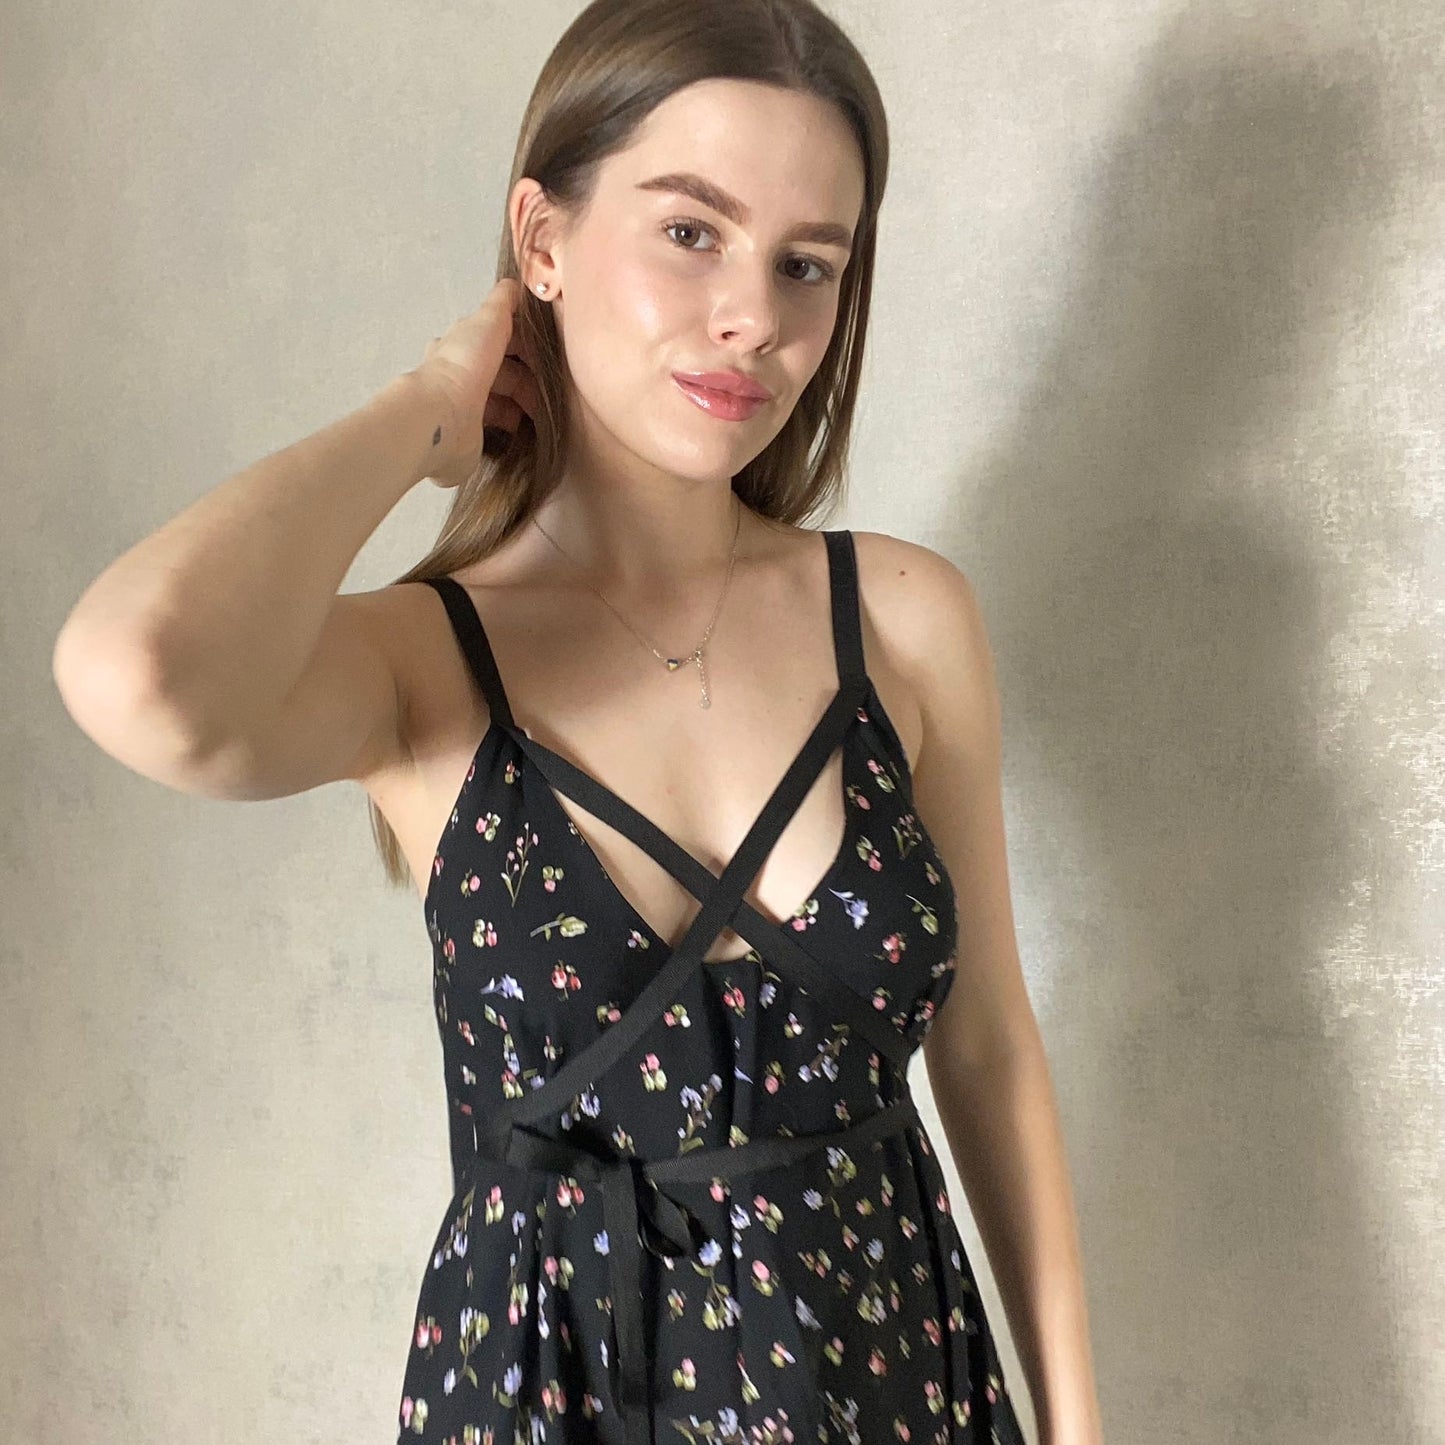 Black dress with ribbons with a floral print